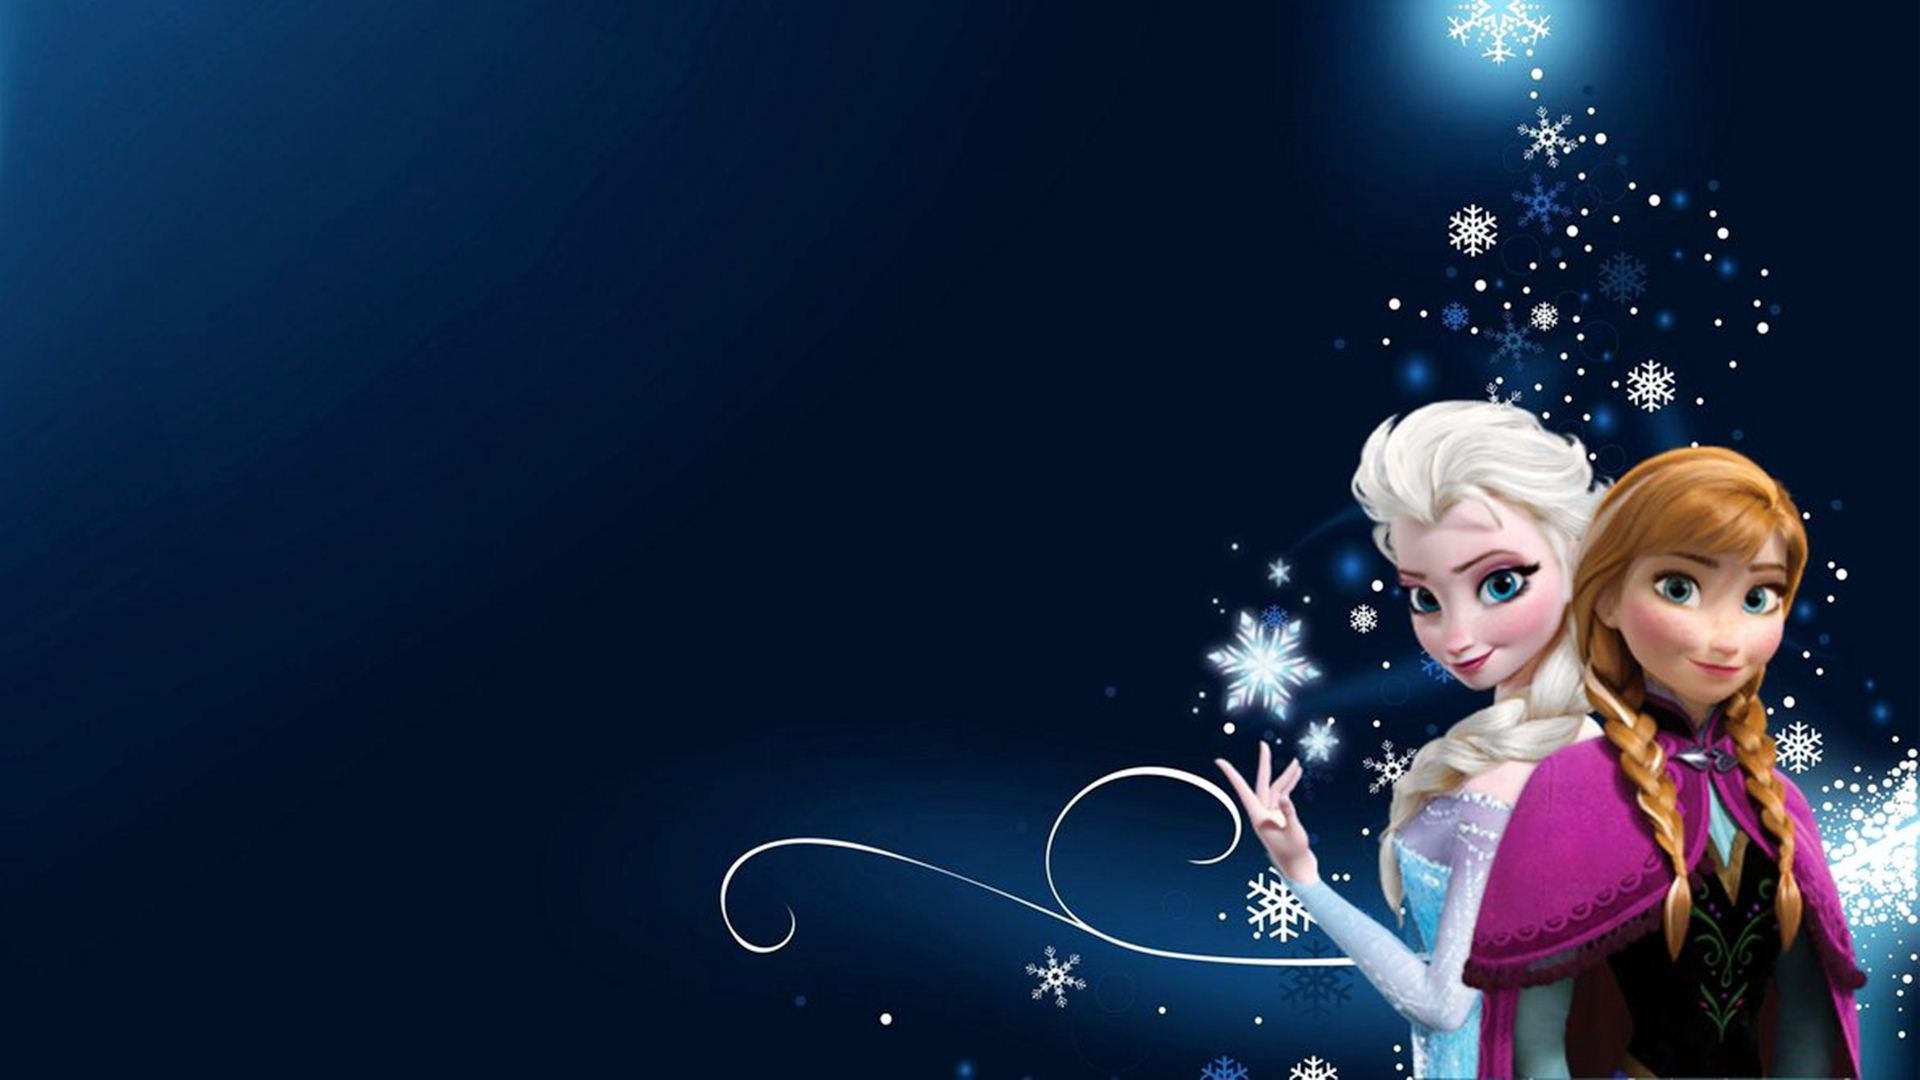 4K Elsa and Anna Wallpaper  Mobile Wallpaper Request by uCloudWooden  r Frozen